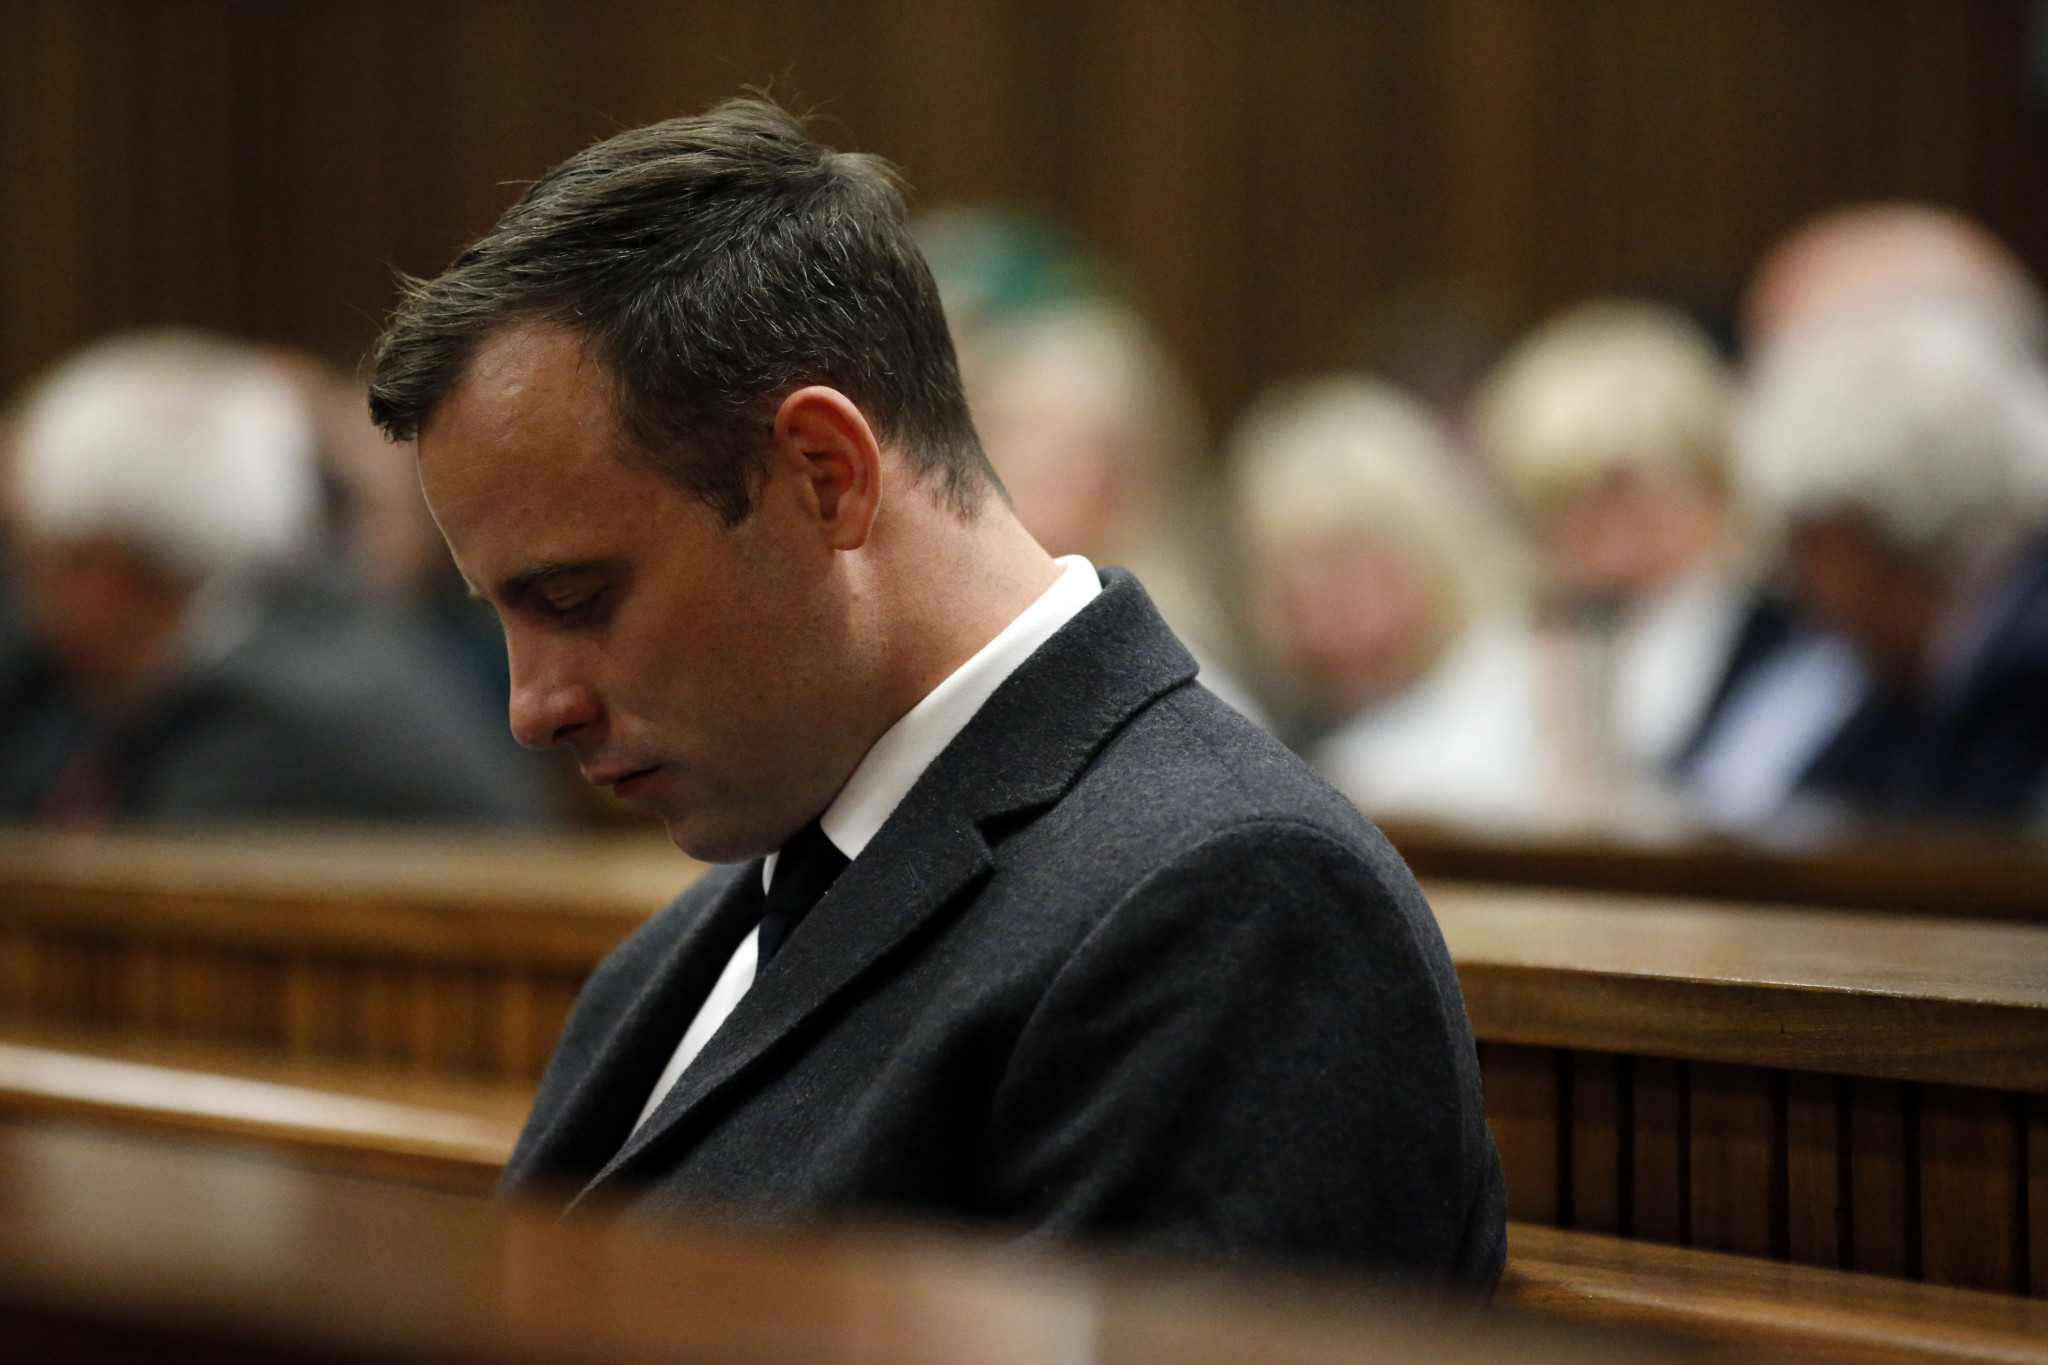 Pistorius moves prison and prepares to meet parents of murdered girlfriend